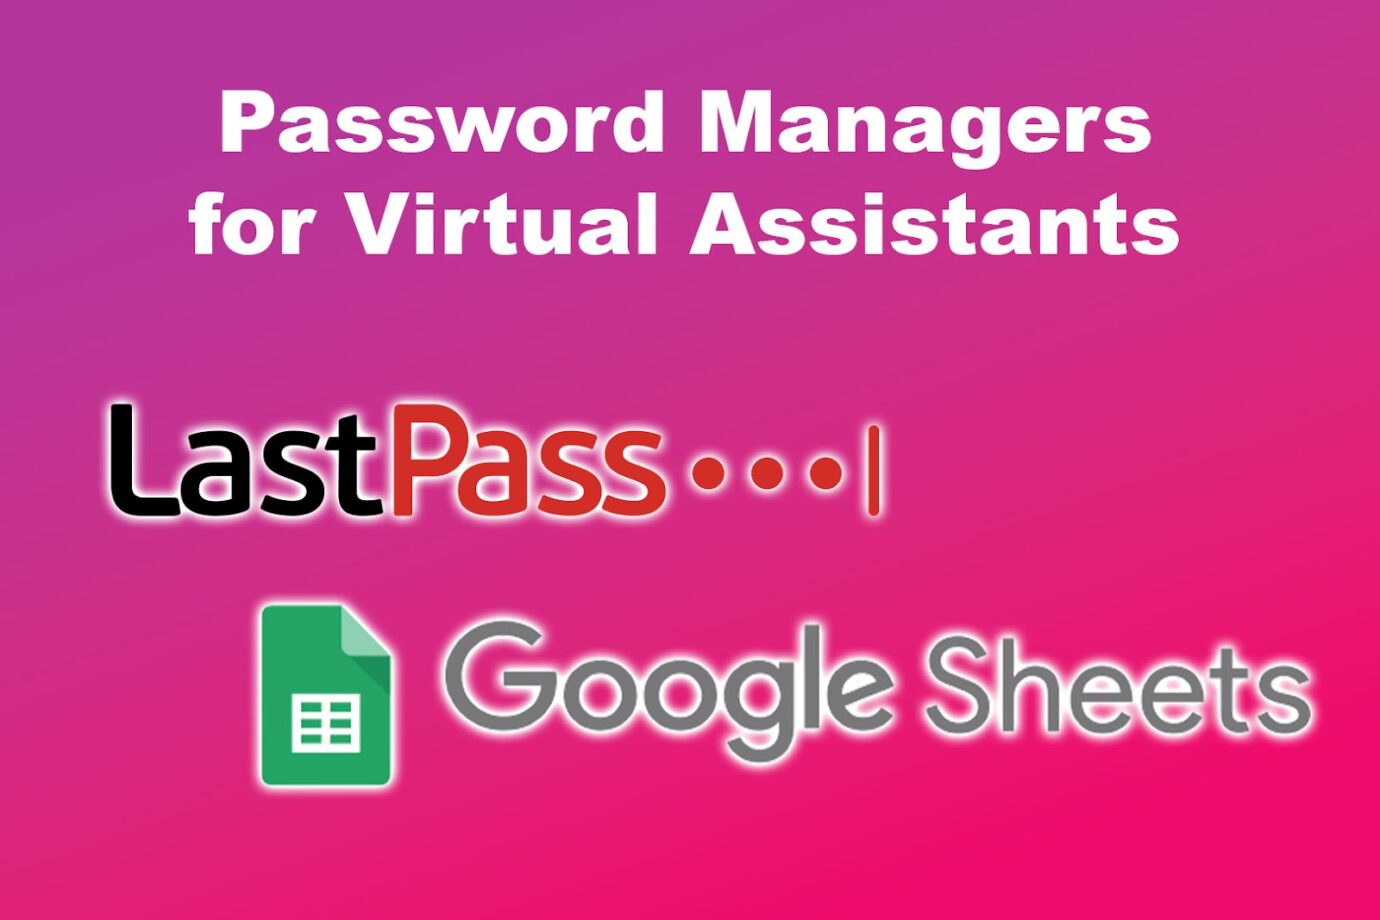 Password Managers for Virtual Assistants